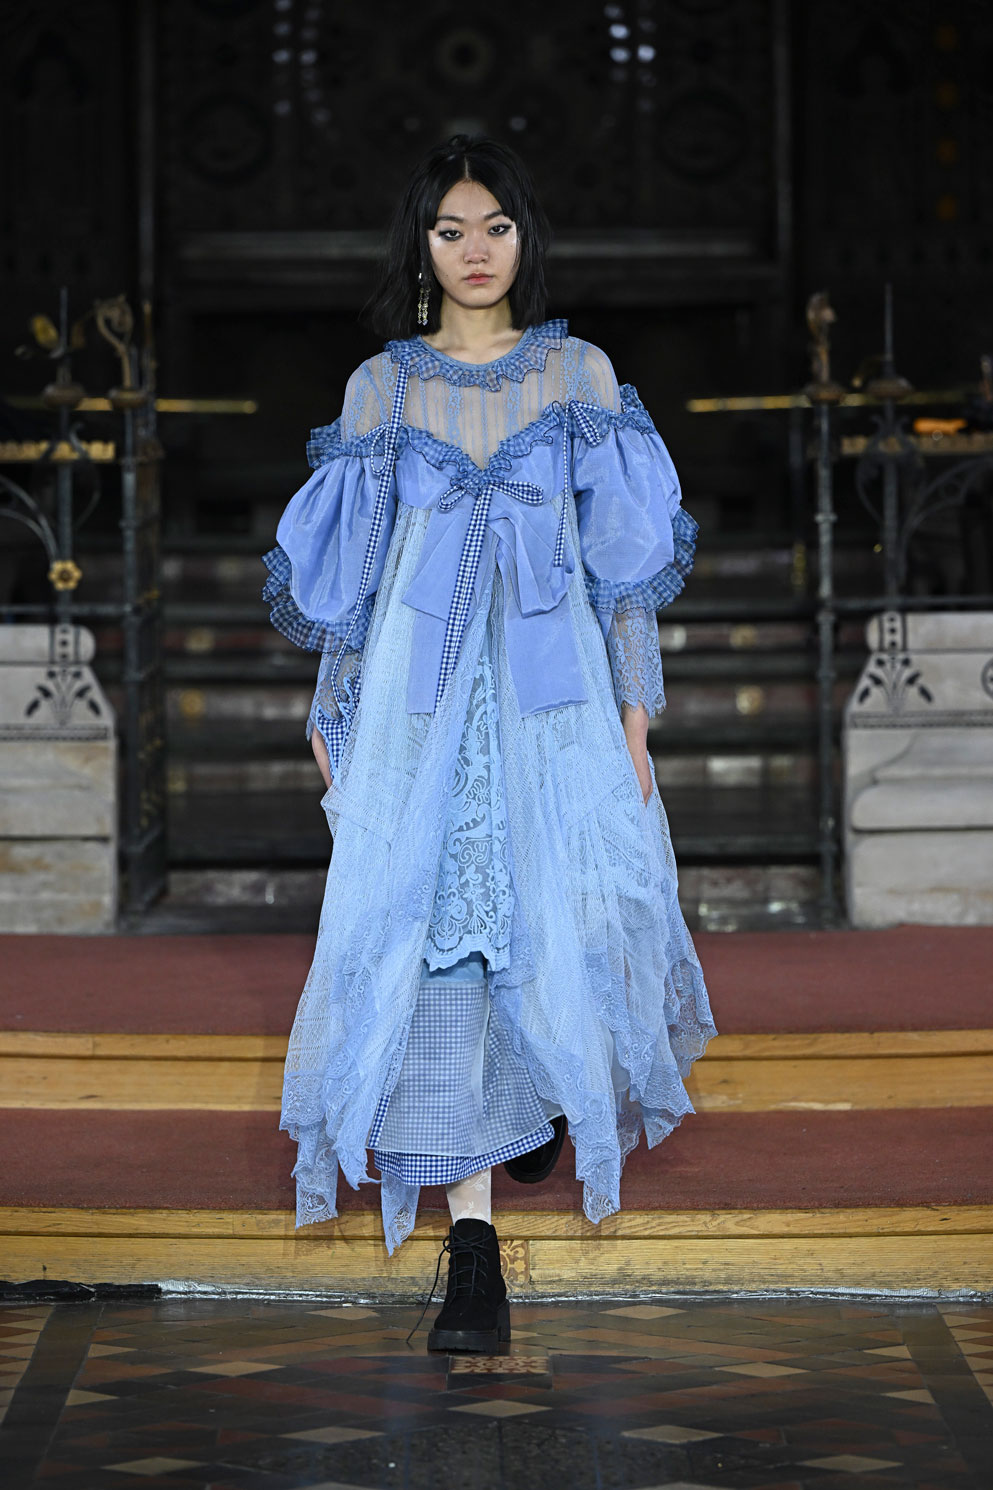 London Fashion Week AW22 – Round-Up - THE FALL